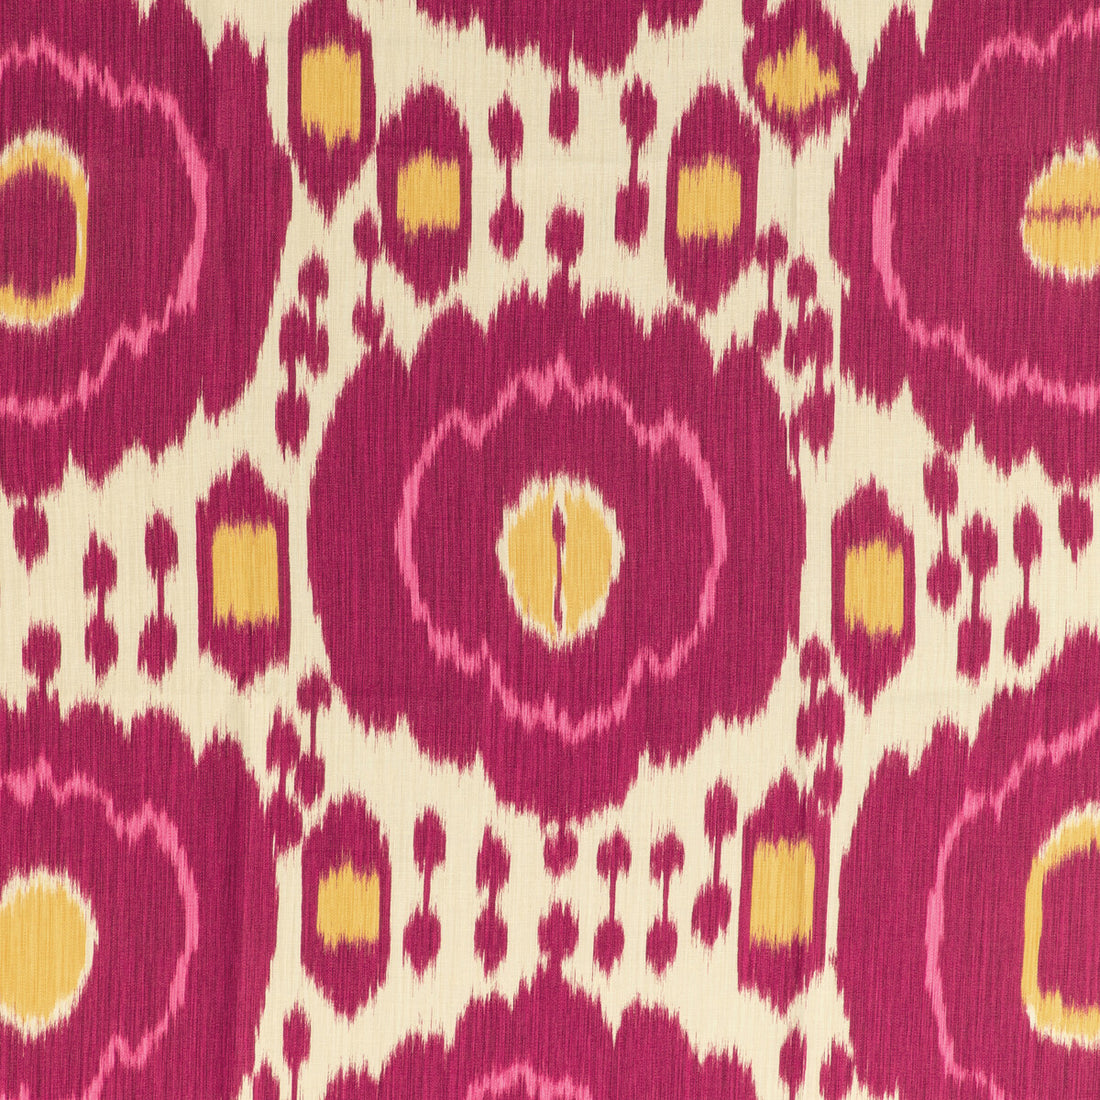 Mayenne Print fabric in cerise color - pattern 8020125.7740.0 - by Brunschwig &amp; Fils in the Louverne collection